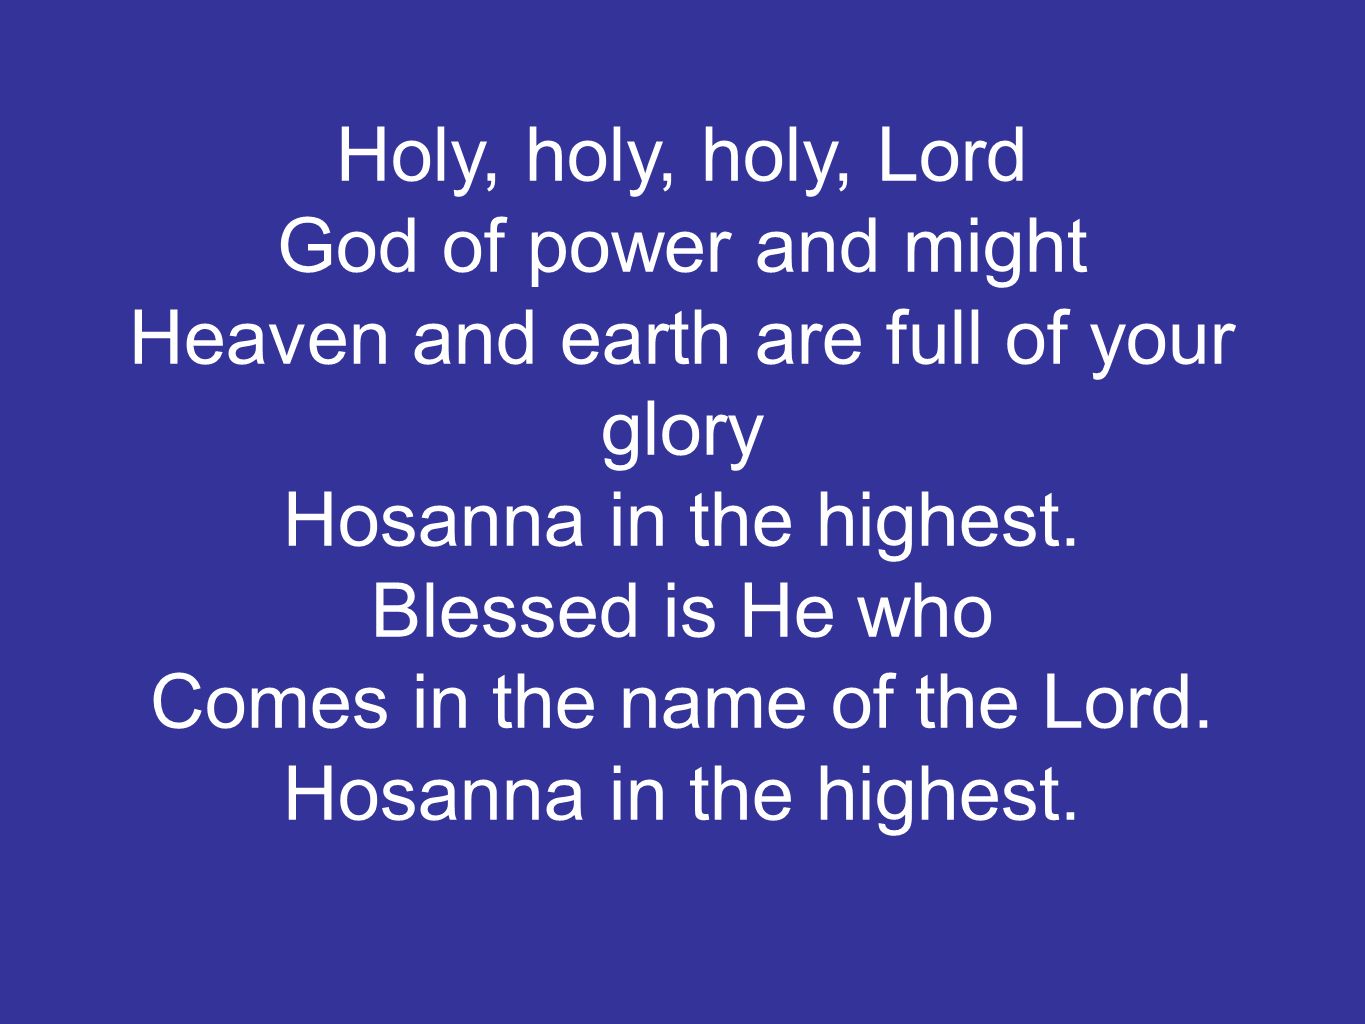 Holy, holy, holy, Lord God of power and might Heaven and earth are full of your glory Hosanna in the highest.